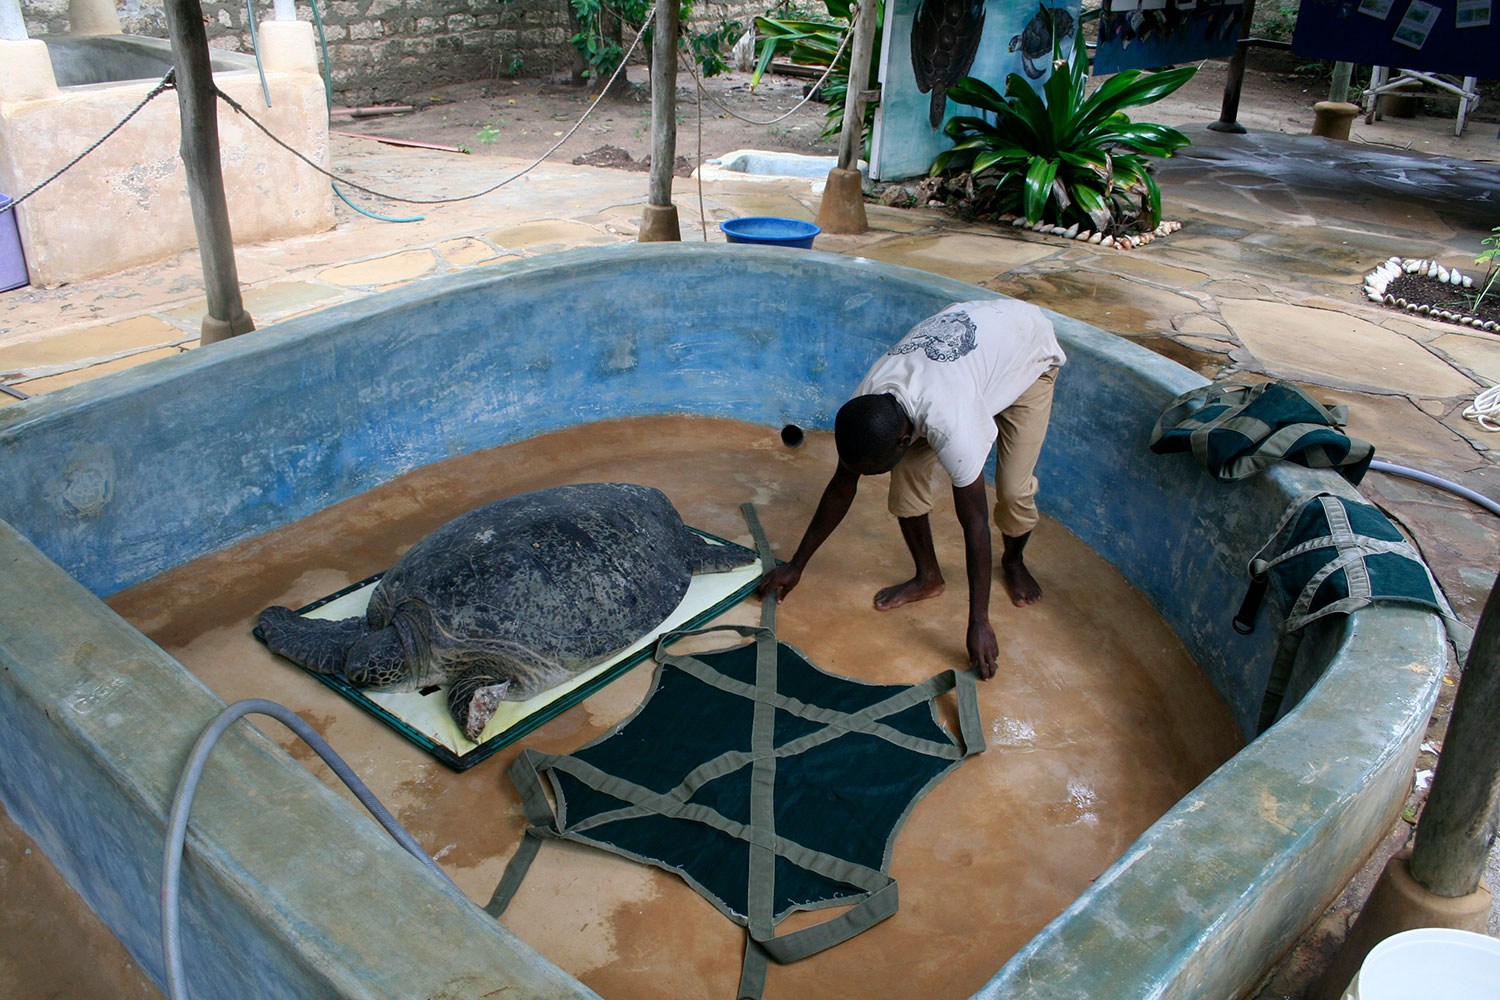 Injured sea turtle in tank with helper.  Photo by Amy Yee.